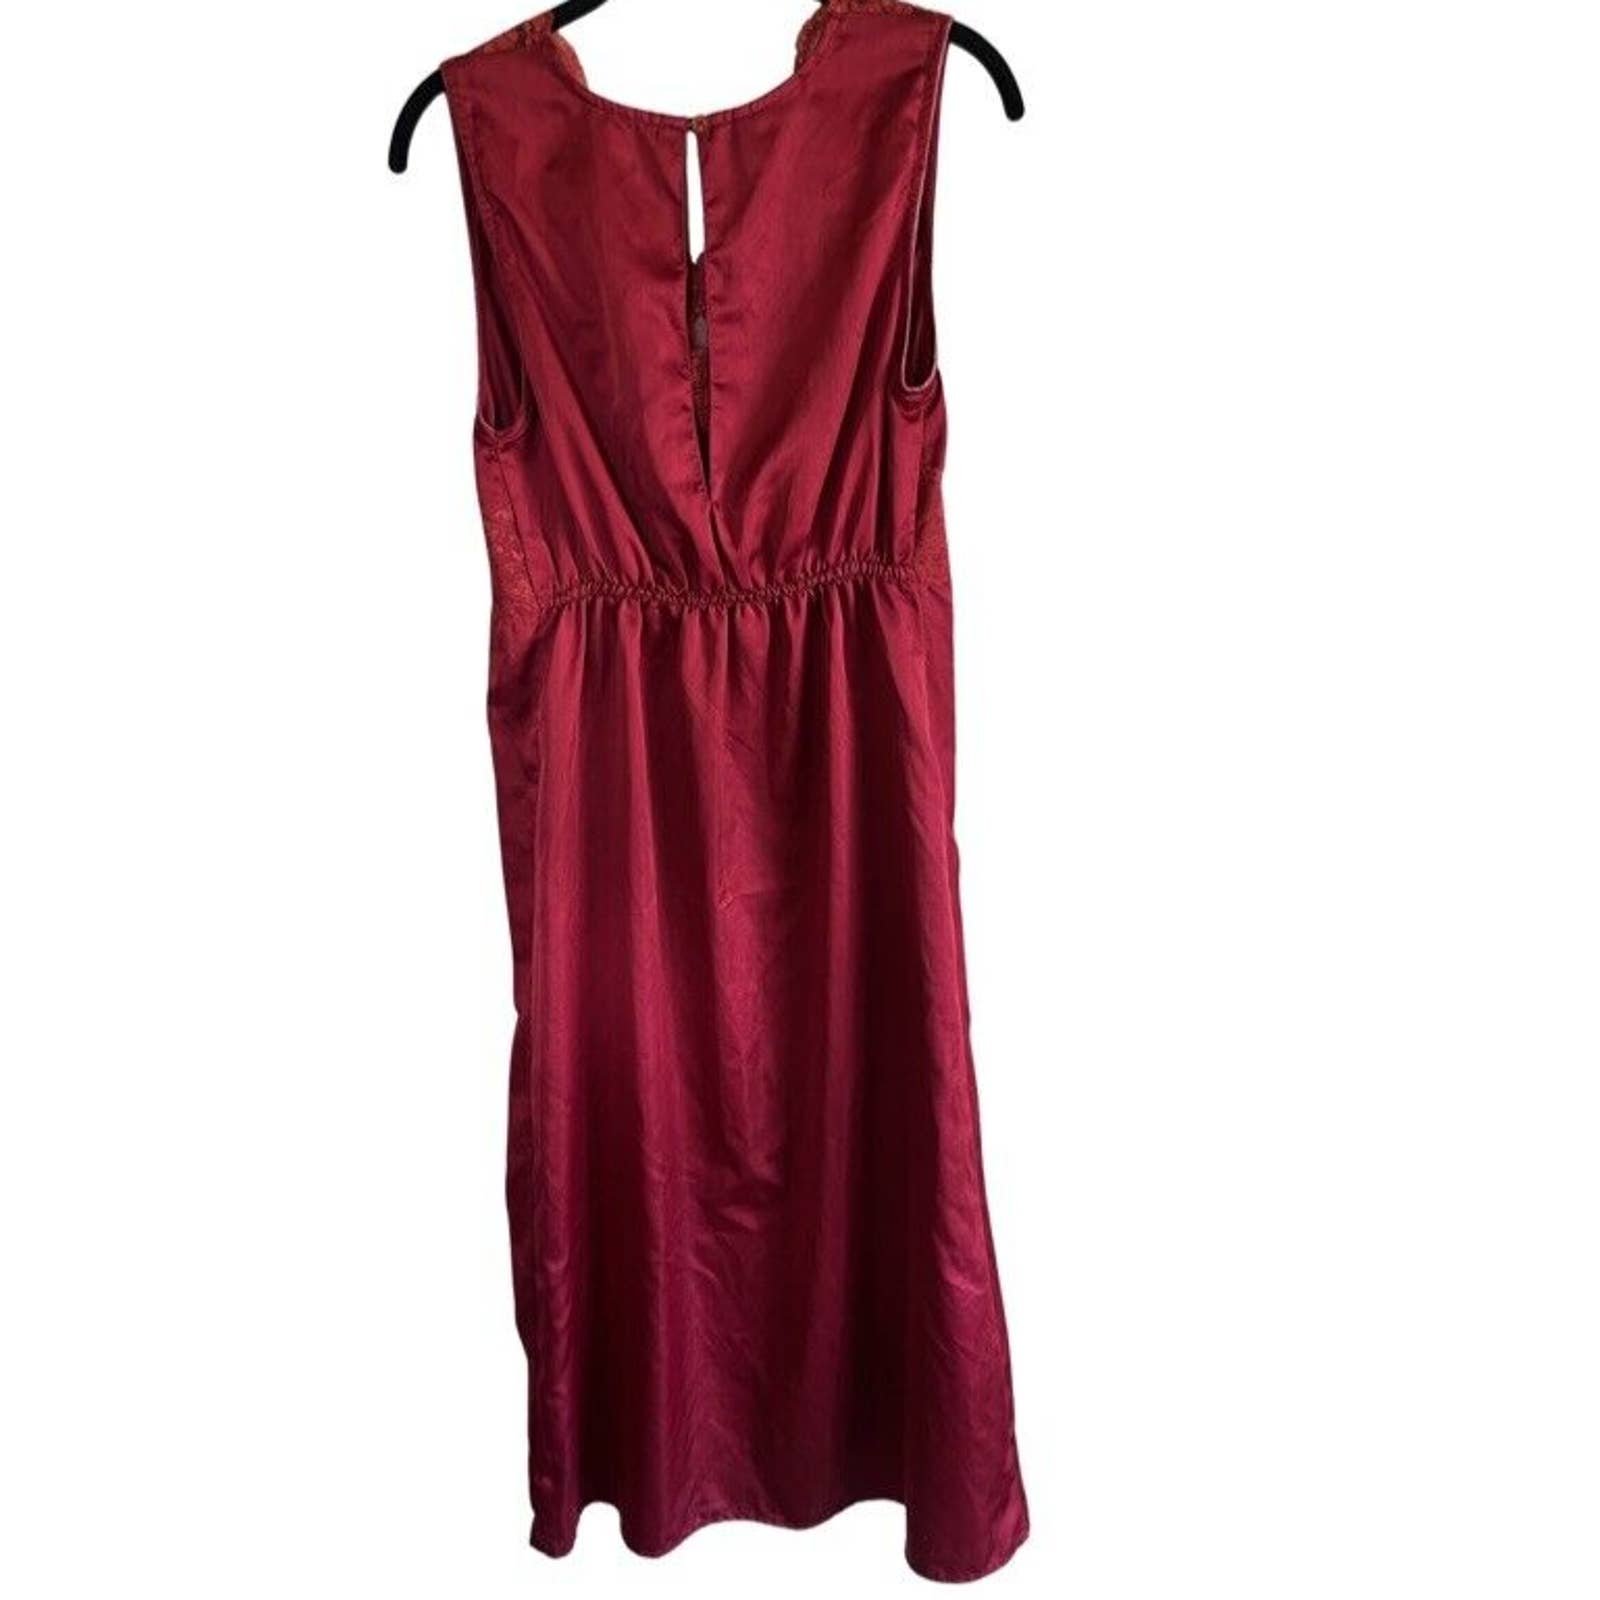 save up to 70% Vintage MEDIUM Otto Burlington Silky Lacey Nightgown Red Slip Dress Gown P7ssGjg8j outlet online shop